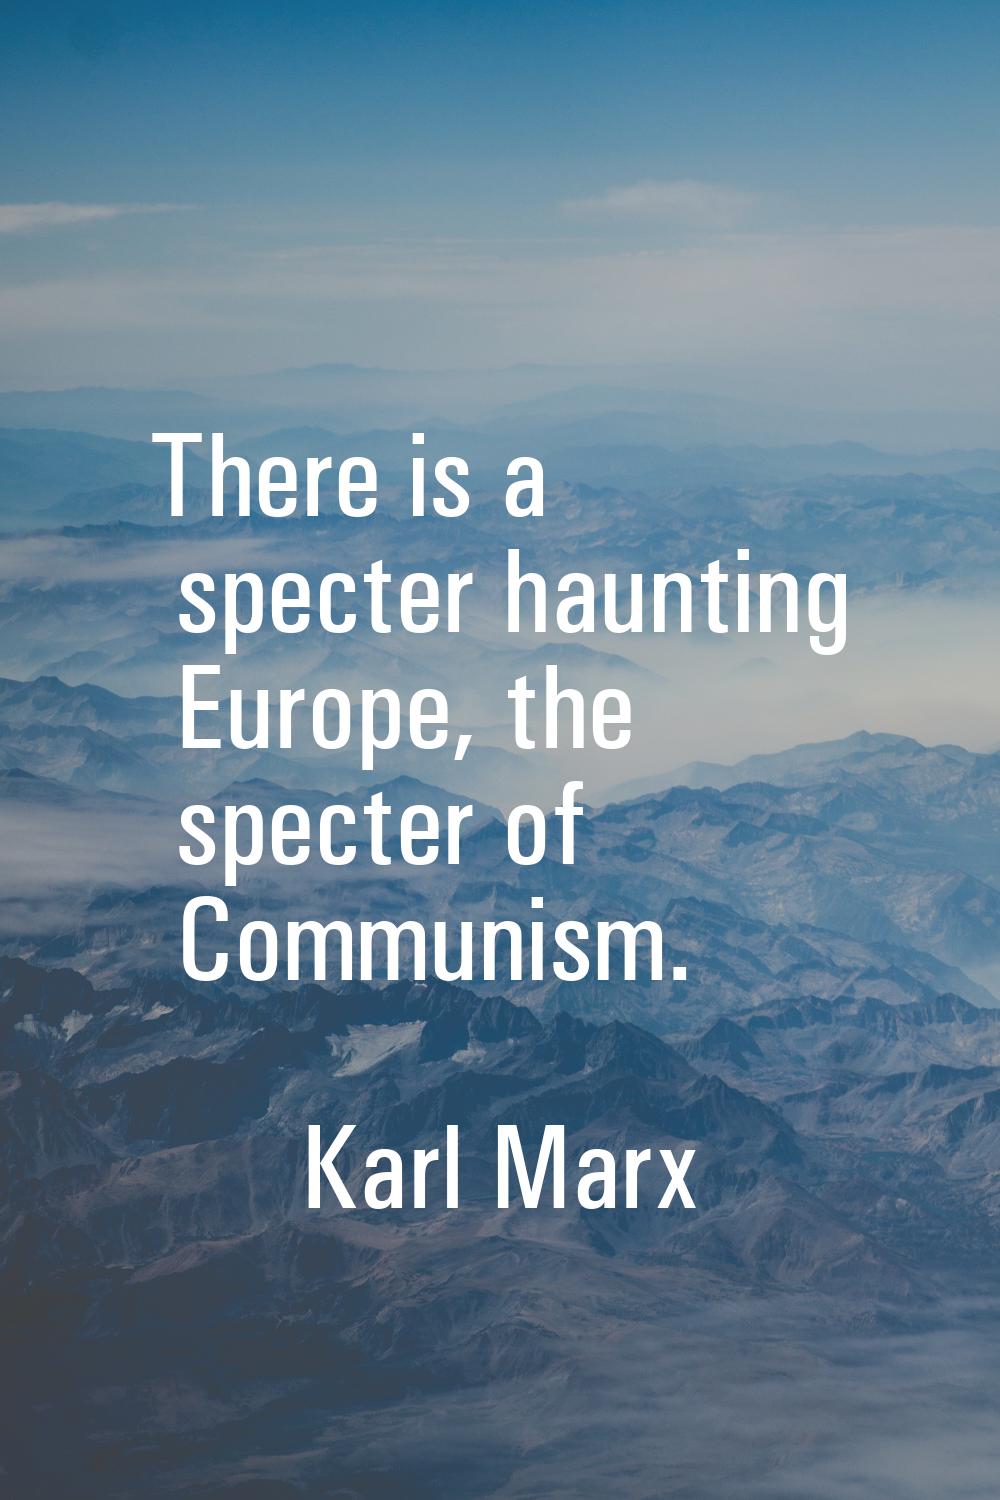 There is a specter haunting Europe, the specter of Communism.